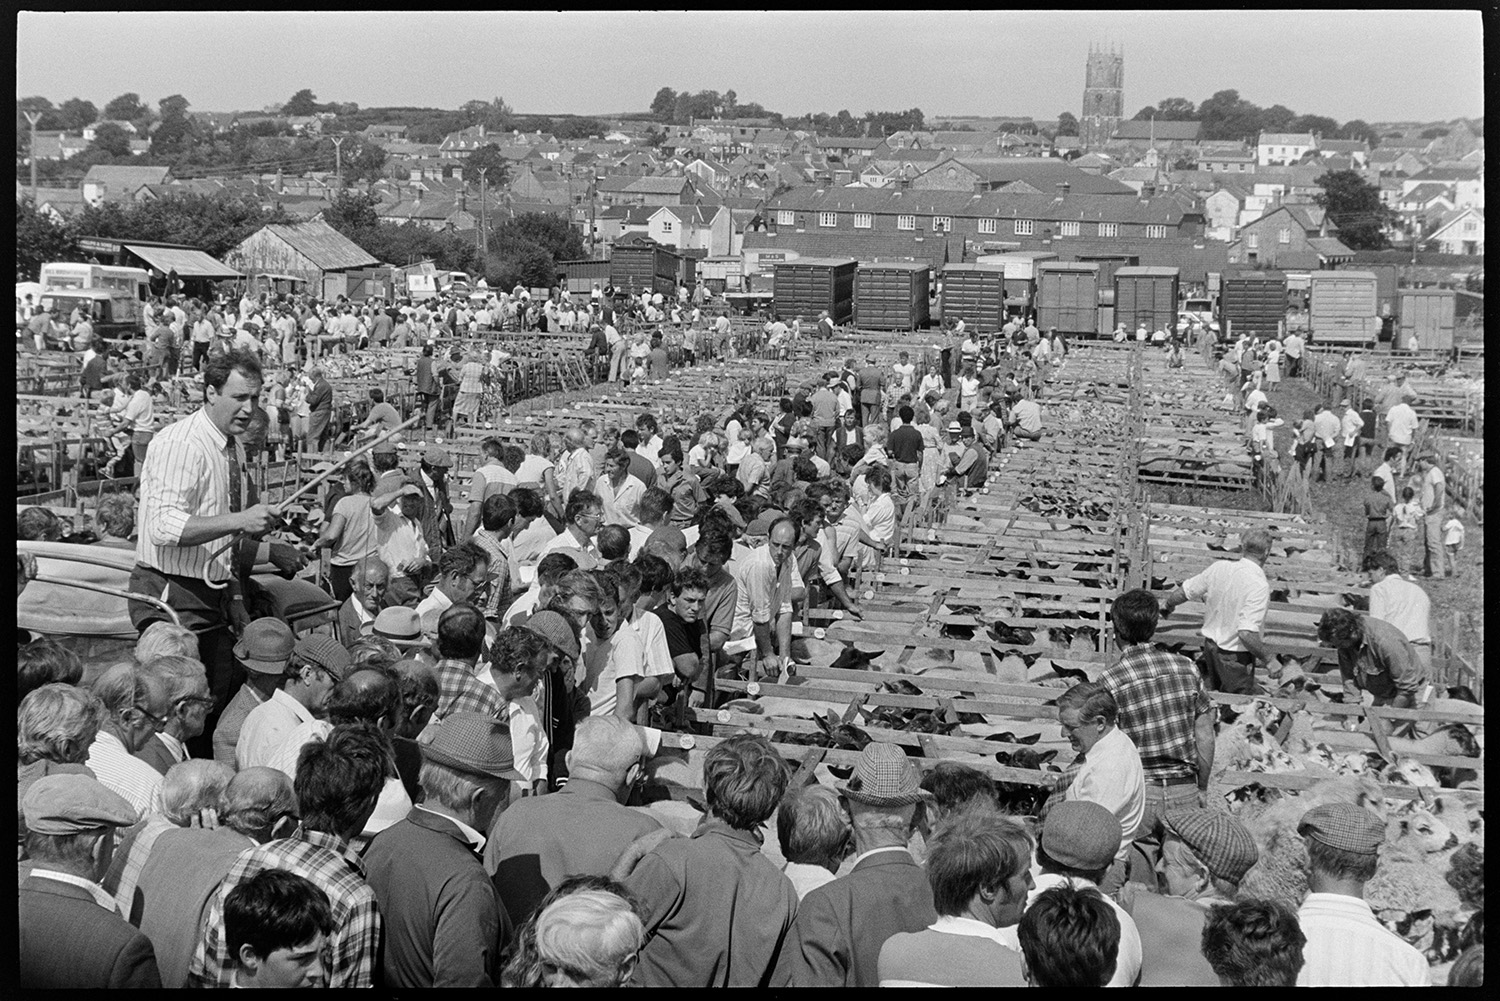 Sheep fair, farmers, auctioneers moving along pens of sheep on hot day. Overview towards town. 
[Men and women walking along rows of sheep pens at South Molton Sheep Fair. An auctioneer is stood in the back of a Land Rover looking over the pens. He is holding a stick. Livestock lorries and the town of South Molton, including the church tower, are visible in the background.]